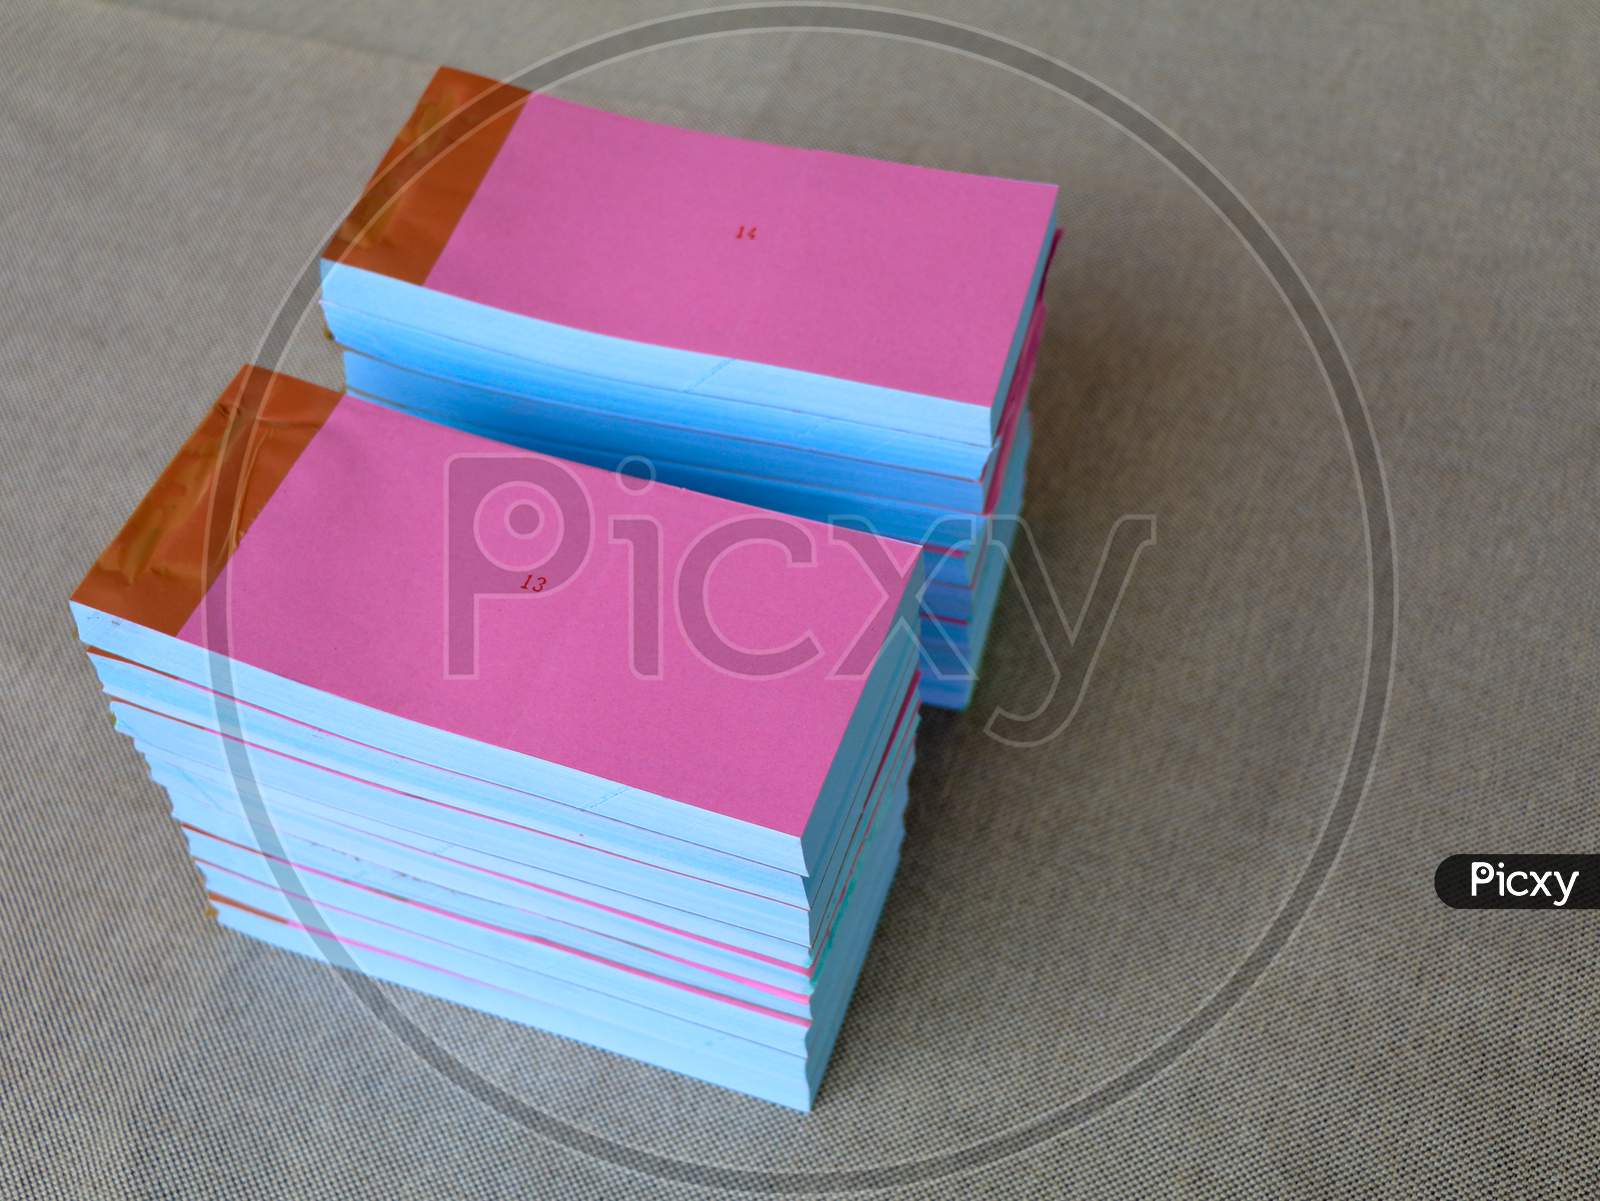 Light Rose Color Bill Books Or Receipt Books On A Cream Color Furnishing Cloth